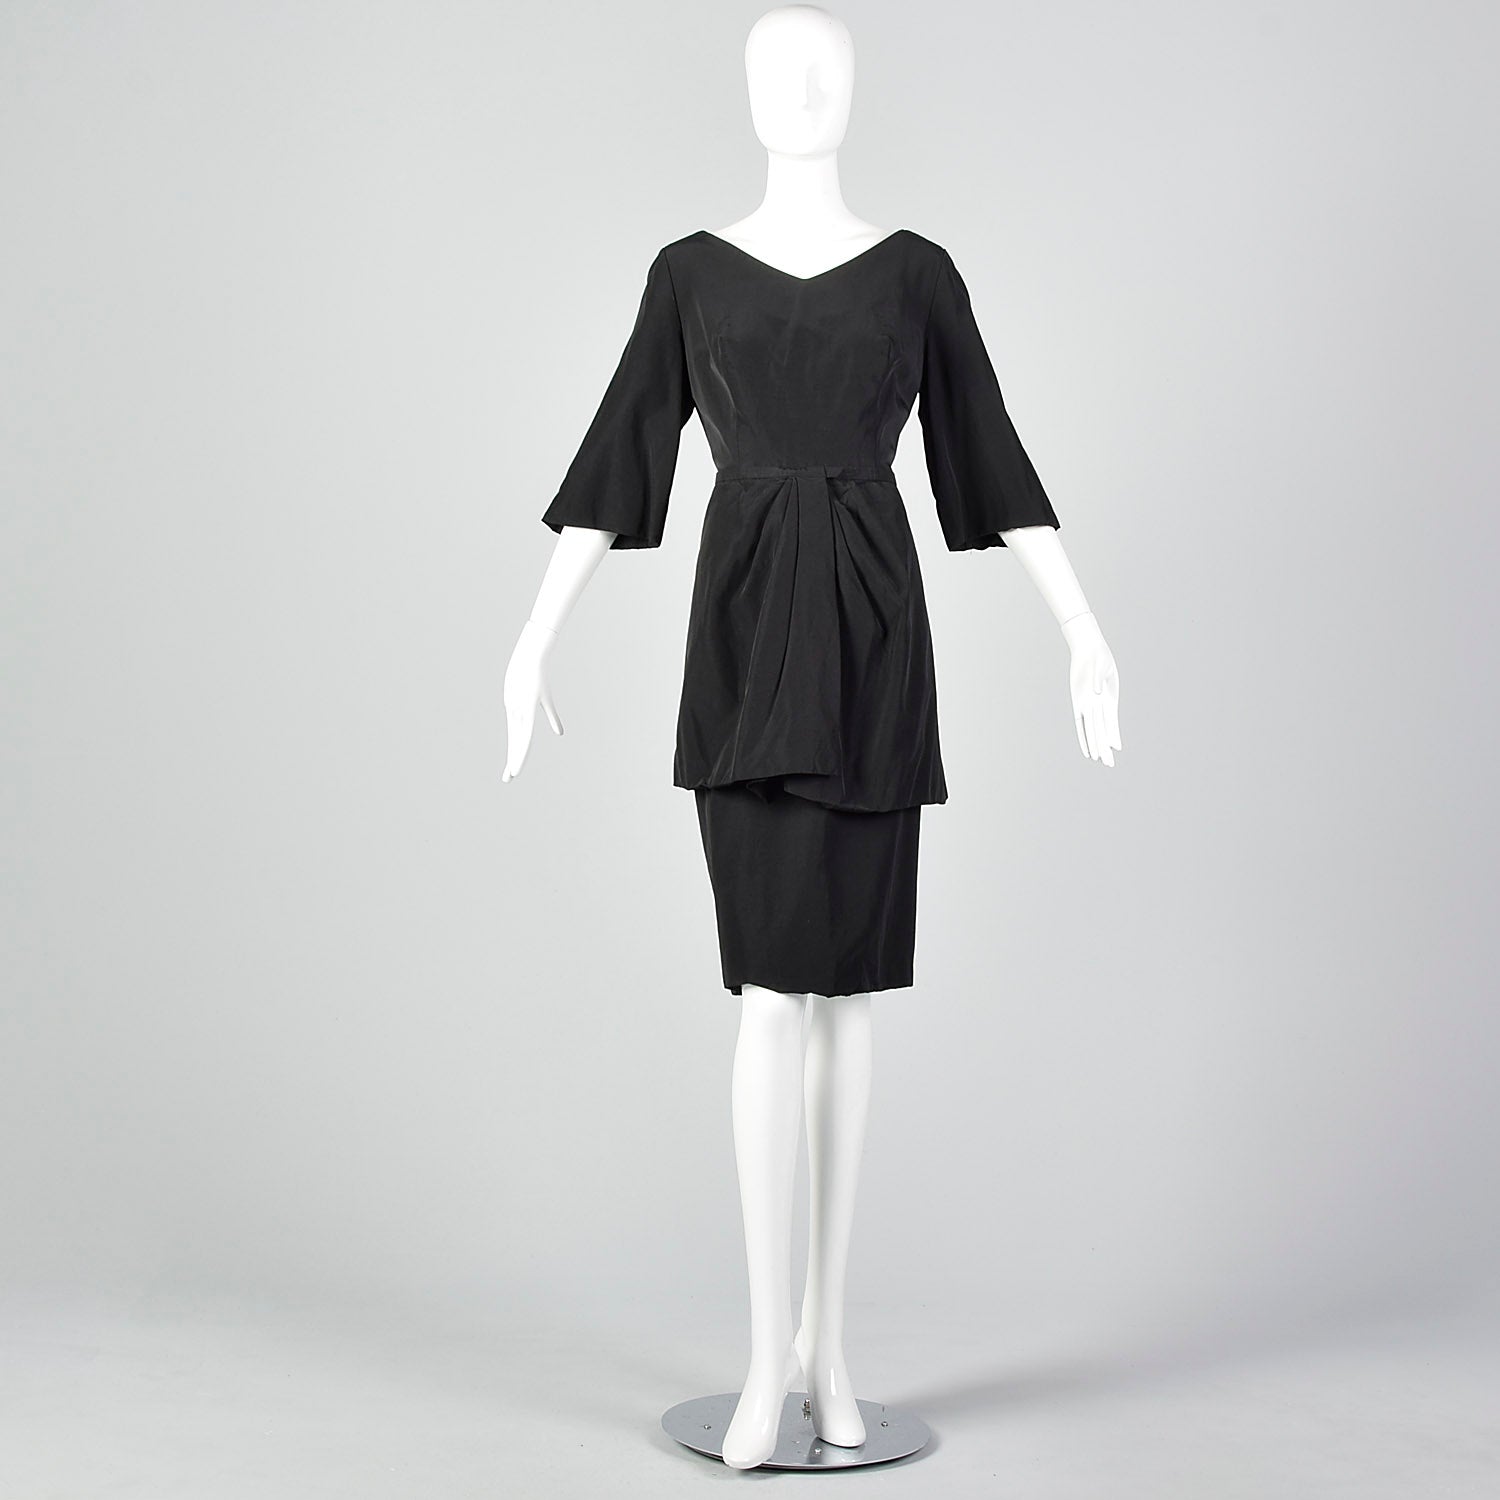 Large 1950s Black Dress and Overskirt